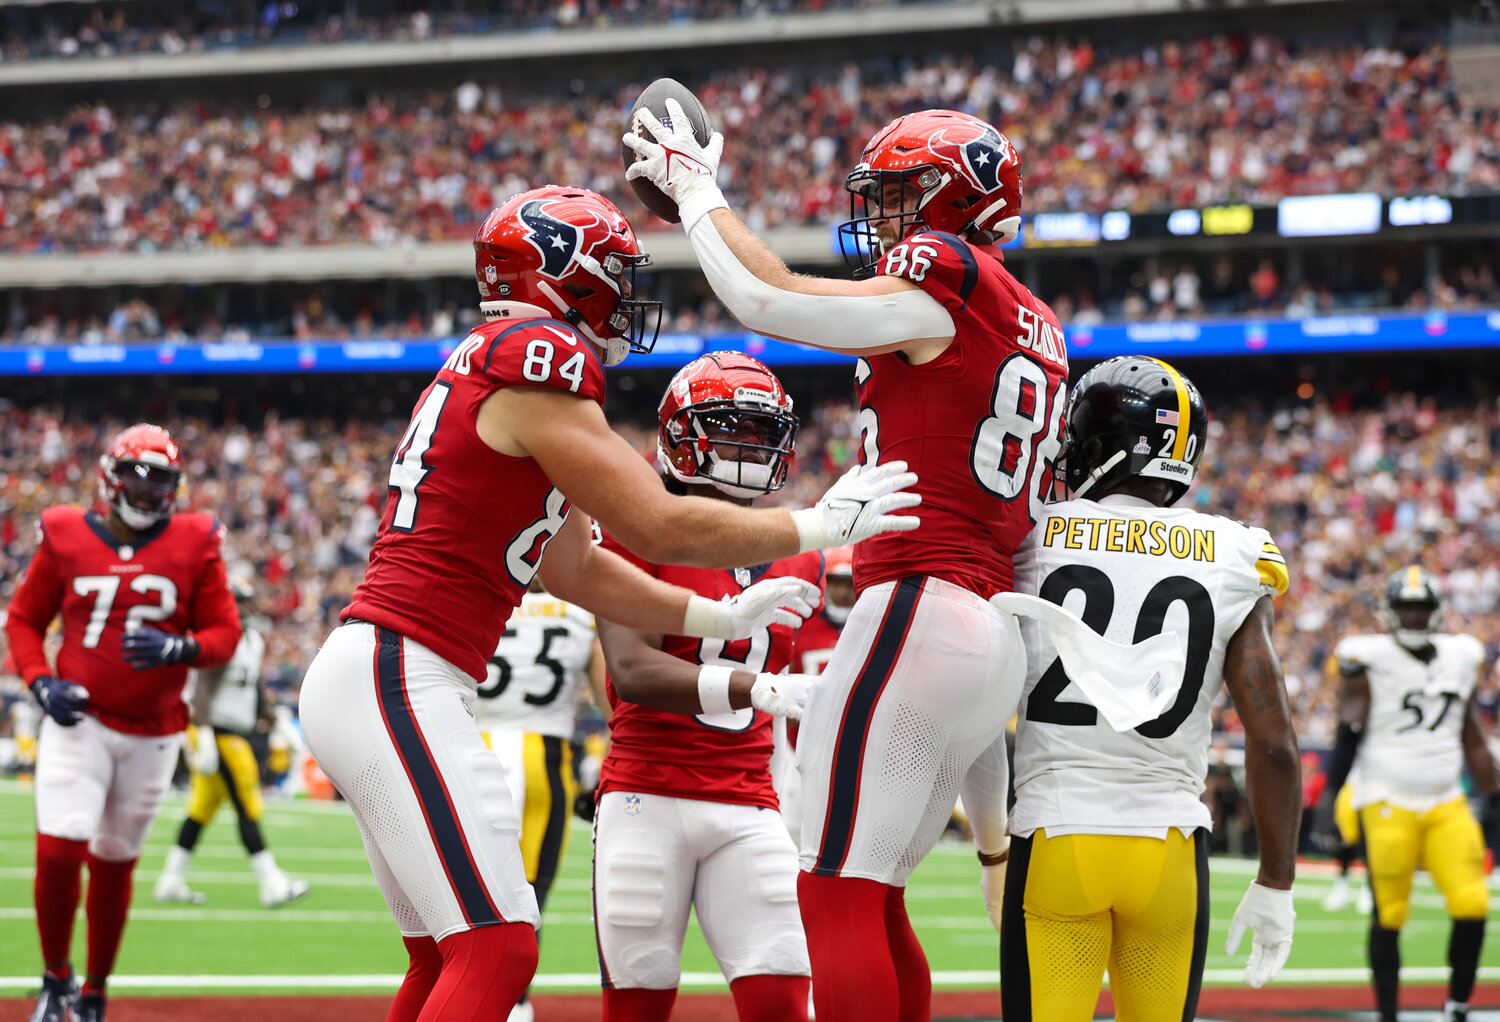 Texans tight end Dalton Schultz (86) celebrates after making a 6-yard touchdown pass during an NFL game between the Houston Texans and the Pittsburgh Steelers on October 1, 2023 in Houston.